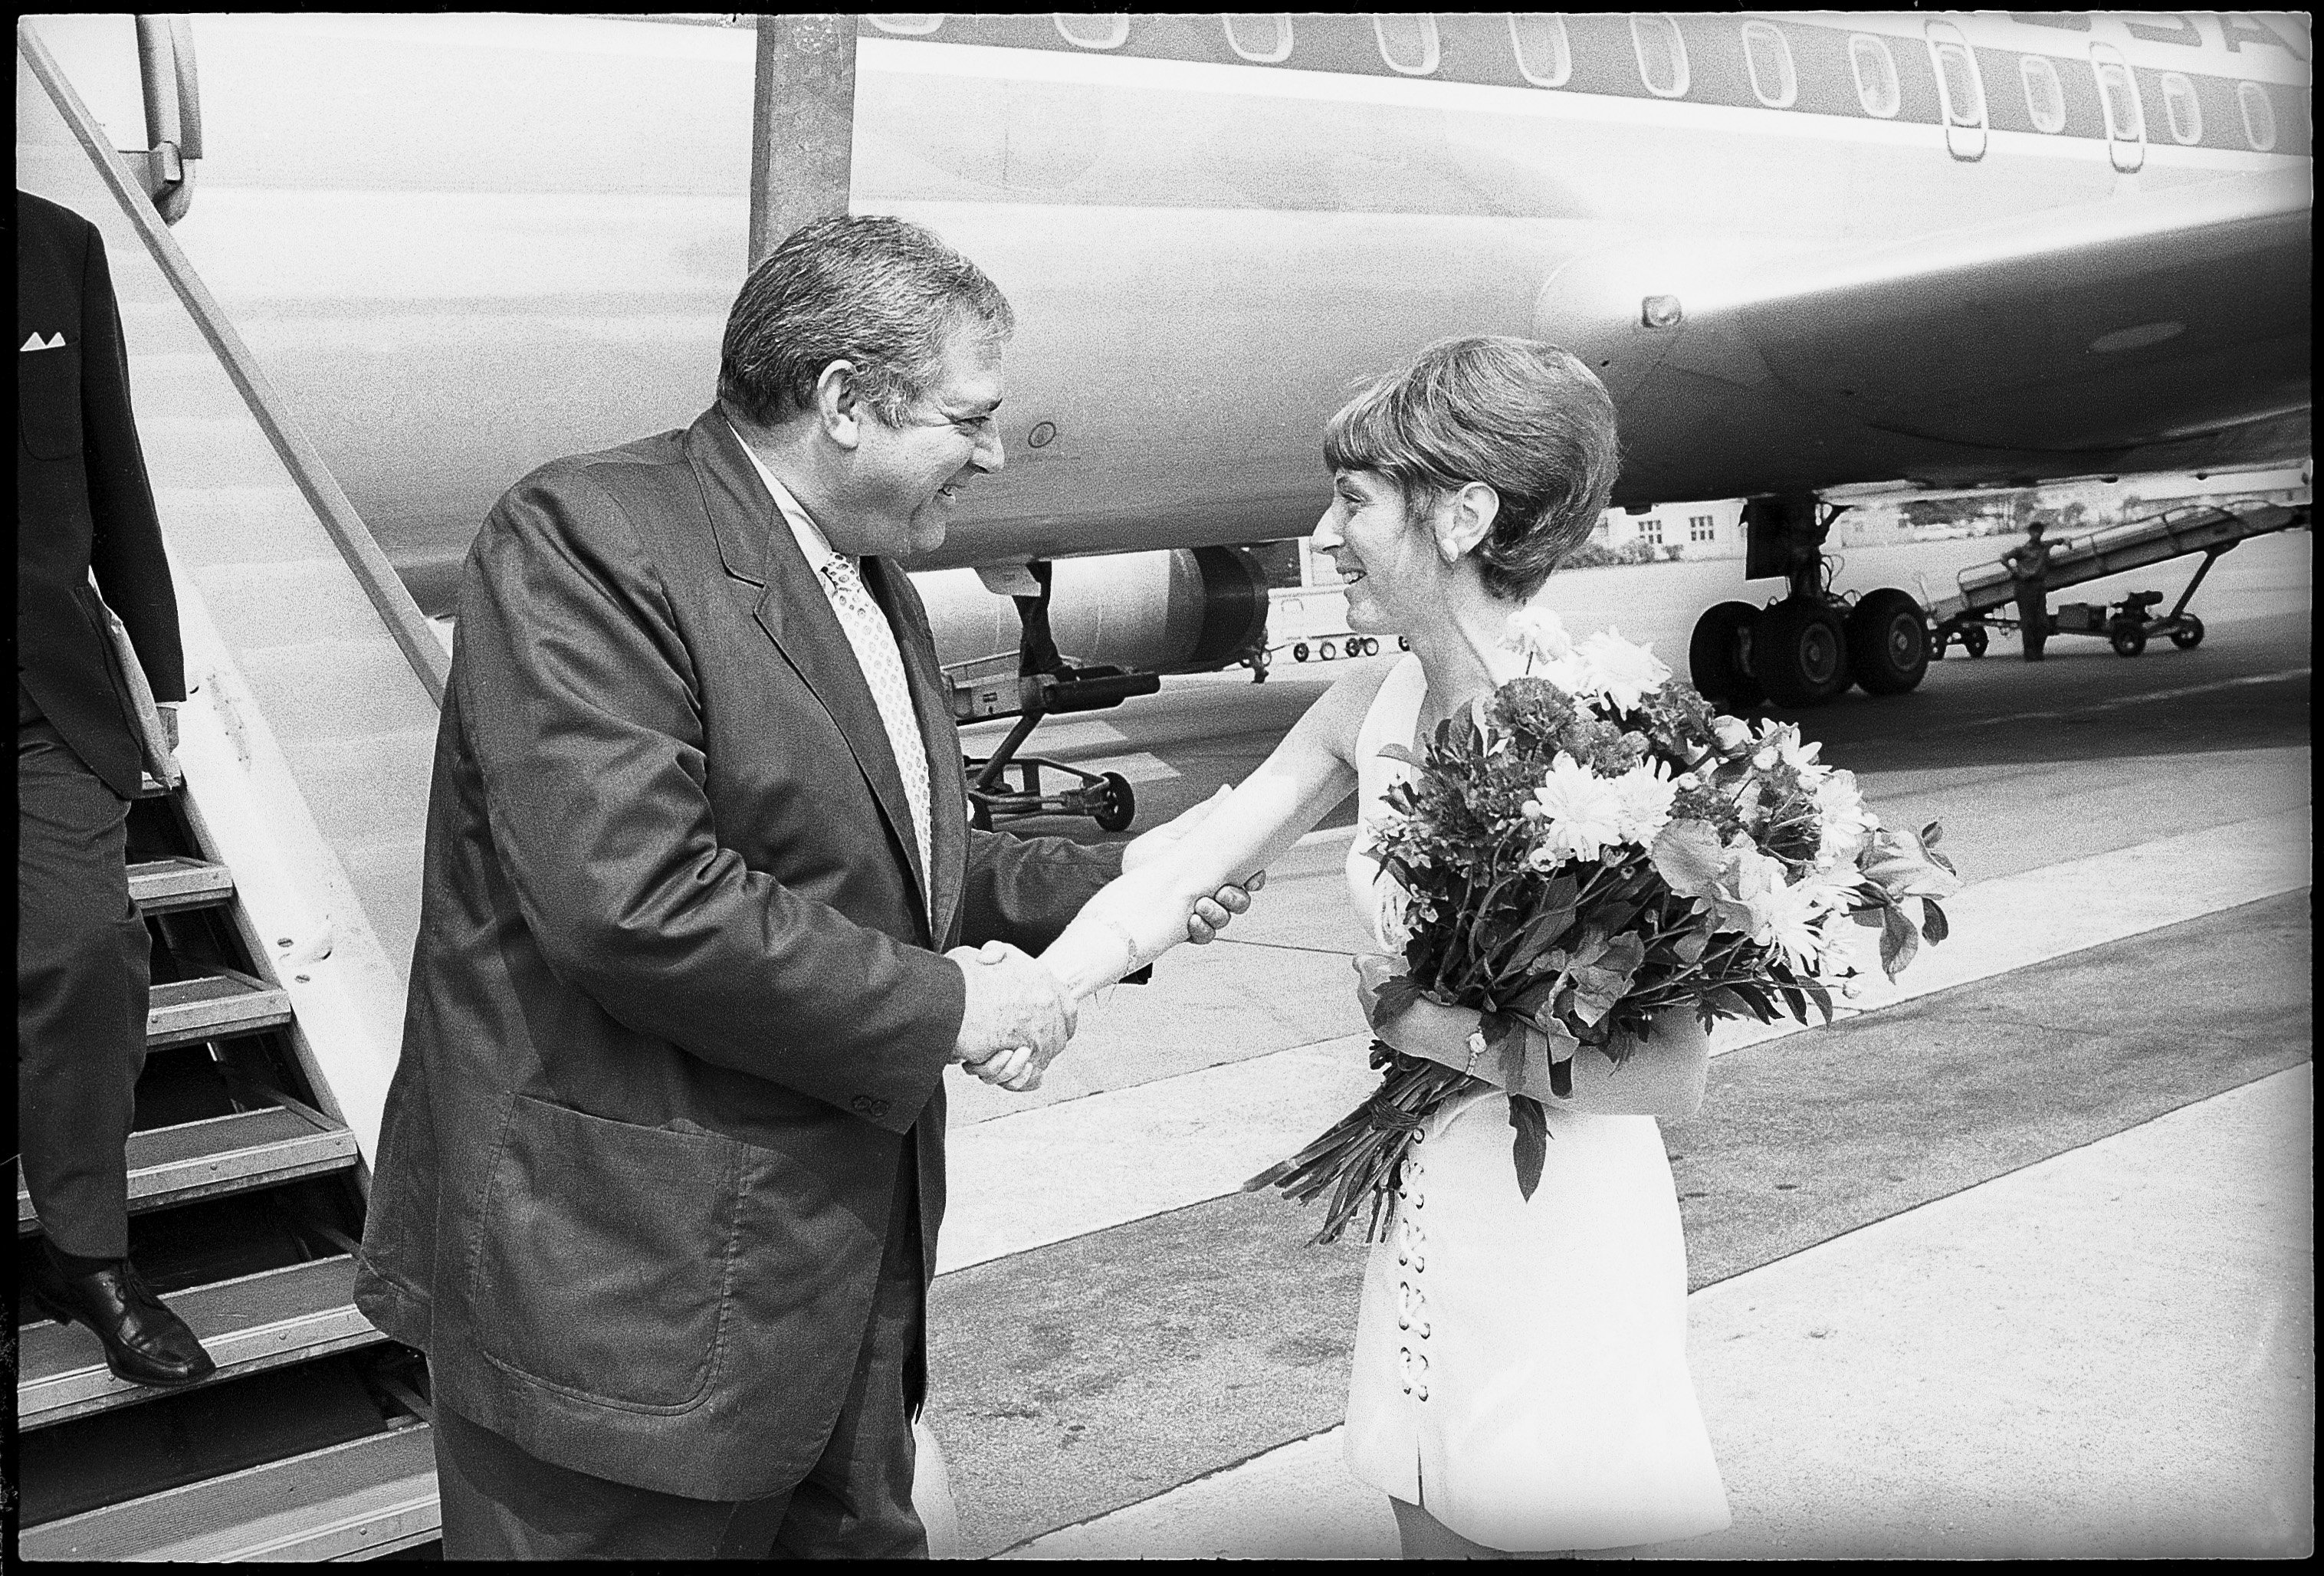 Raymond Burr pictured shaking hands with an unknown woman in der Schweiz 1970. | Source: Getty Images